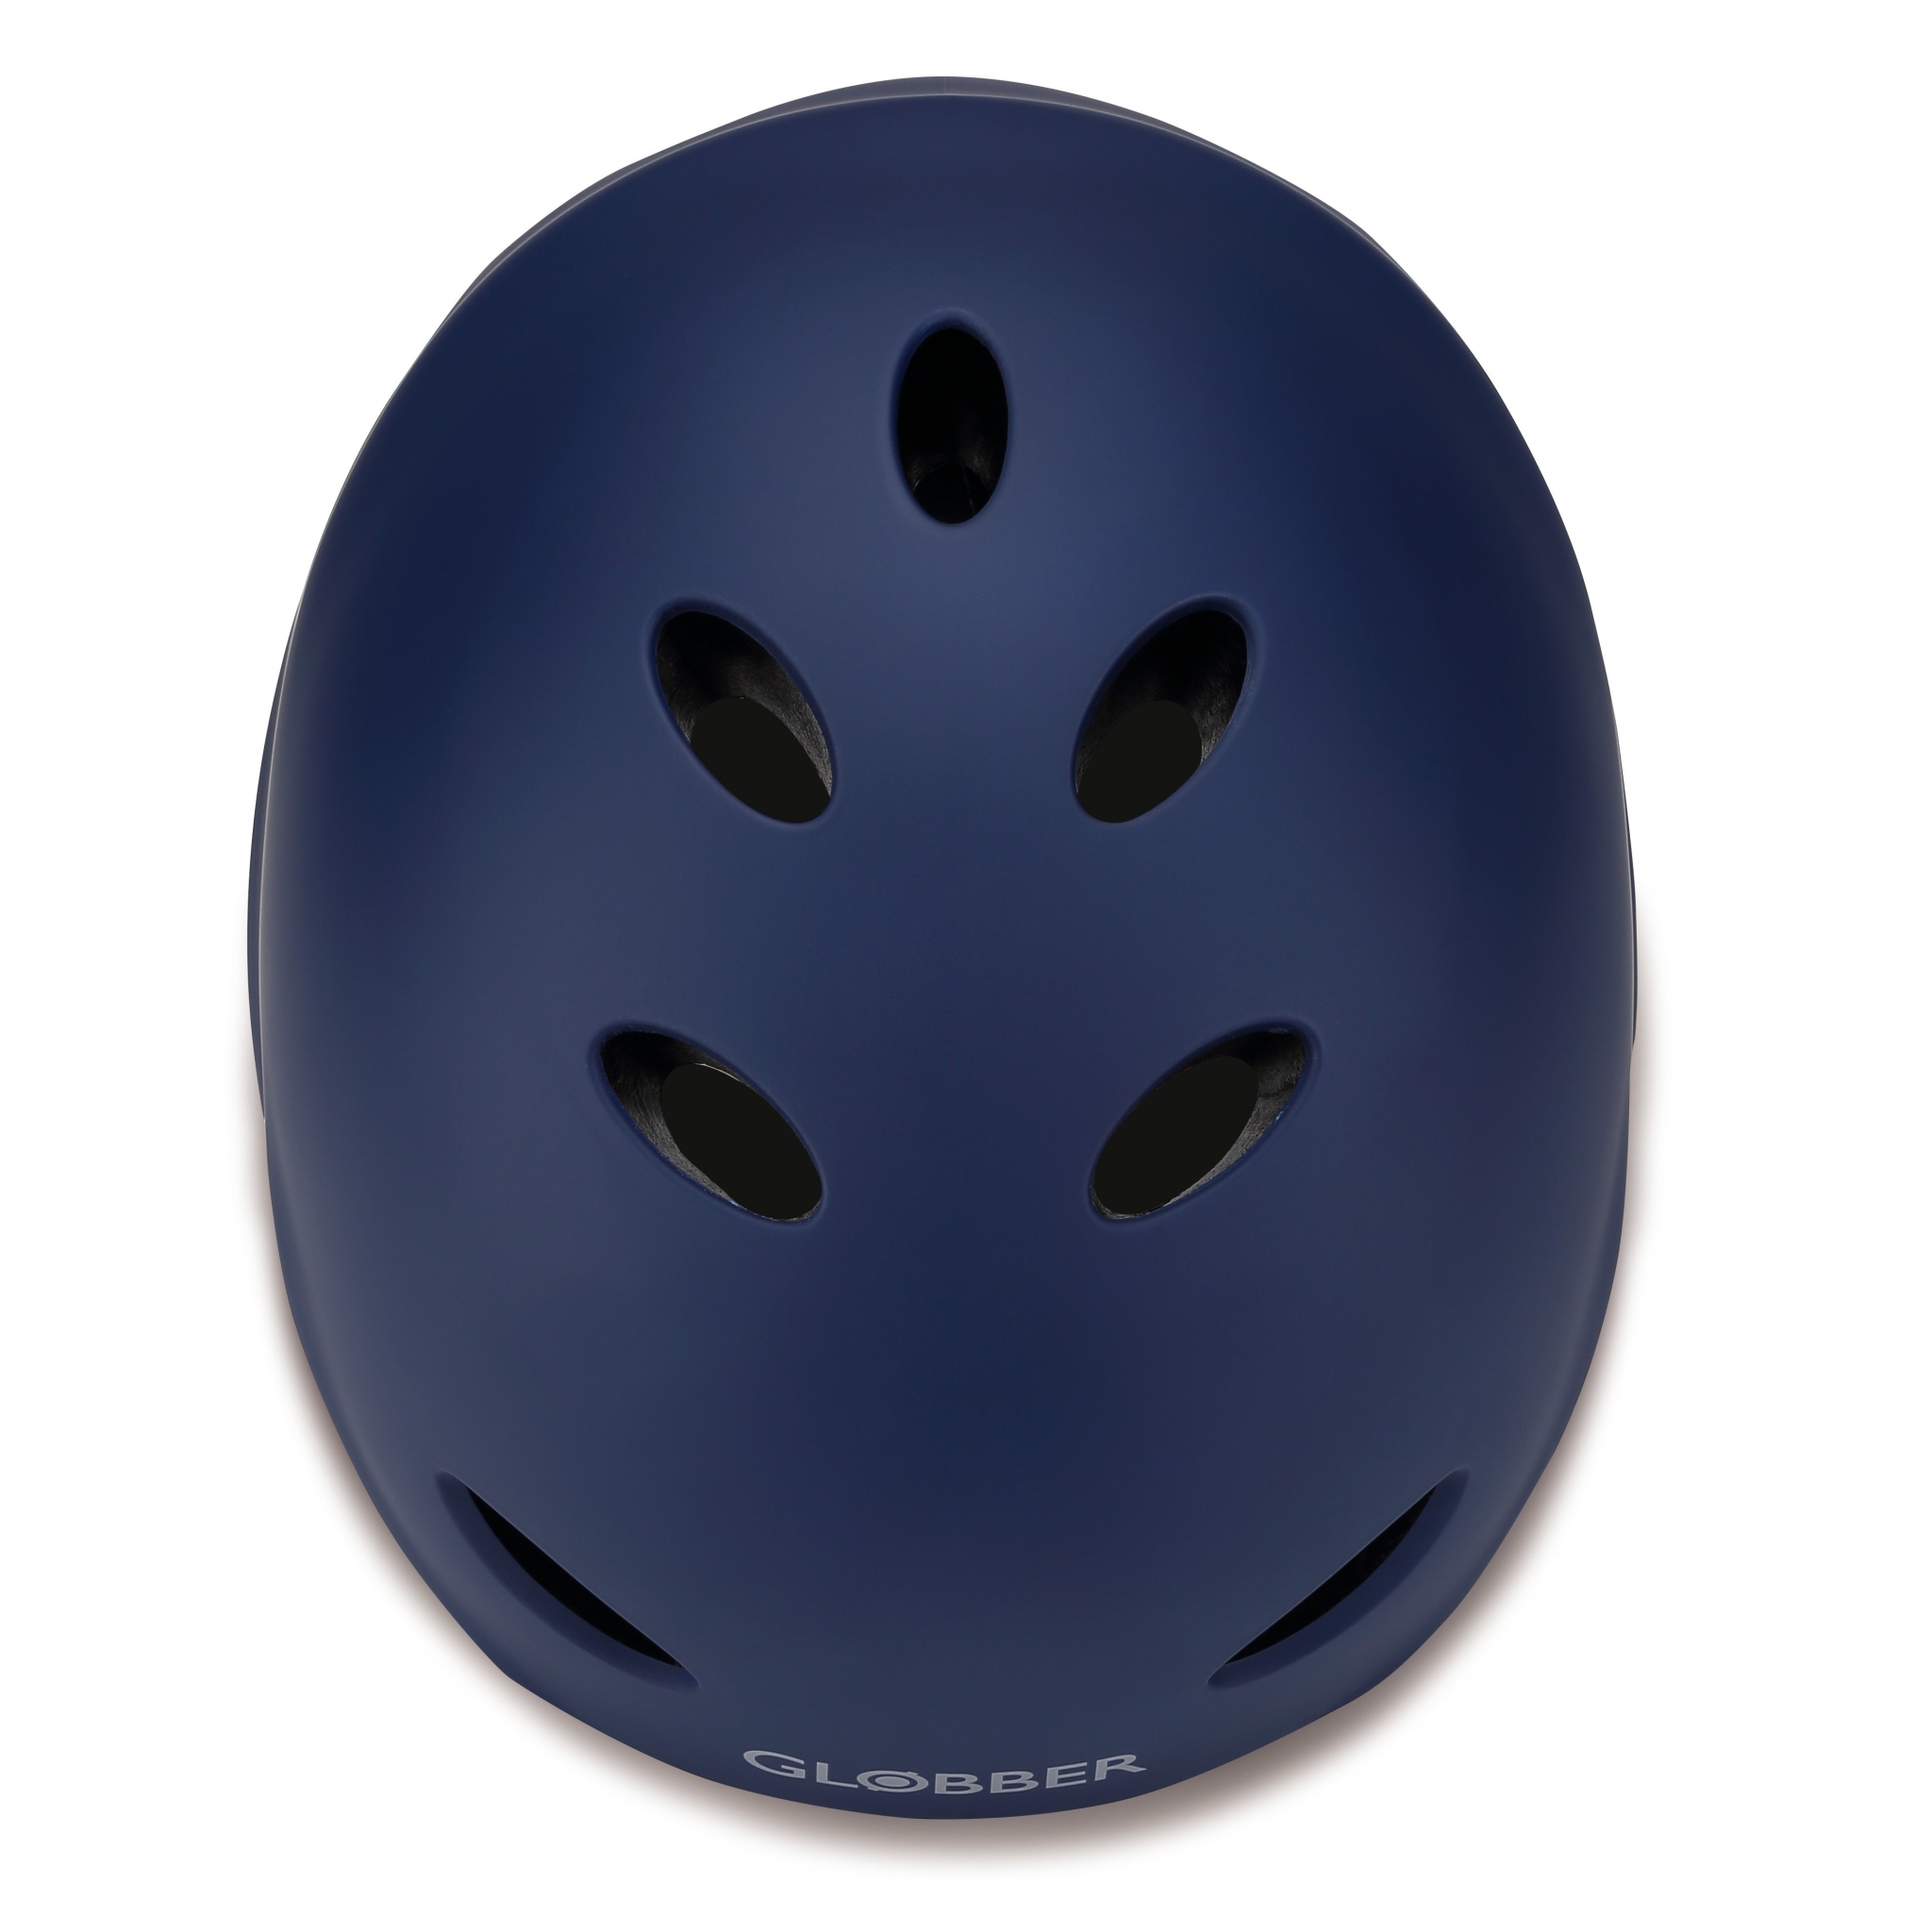 scooter helmet for adults - Globber 1